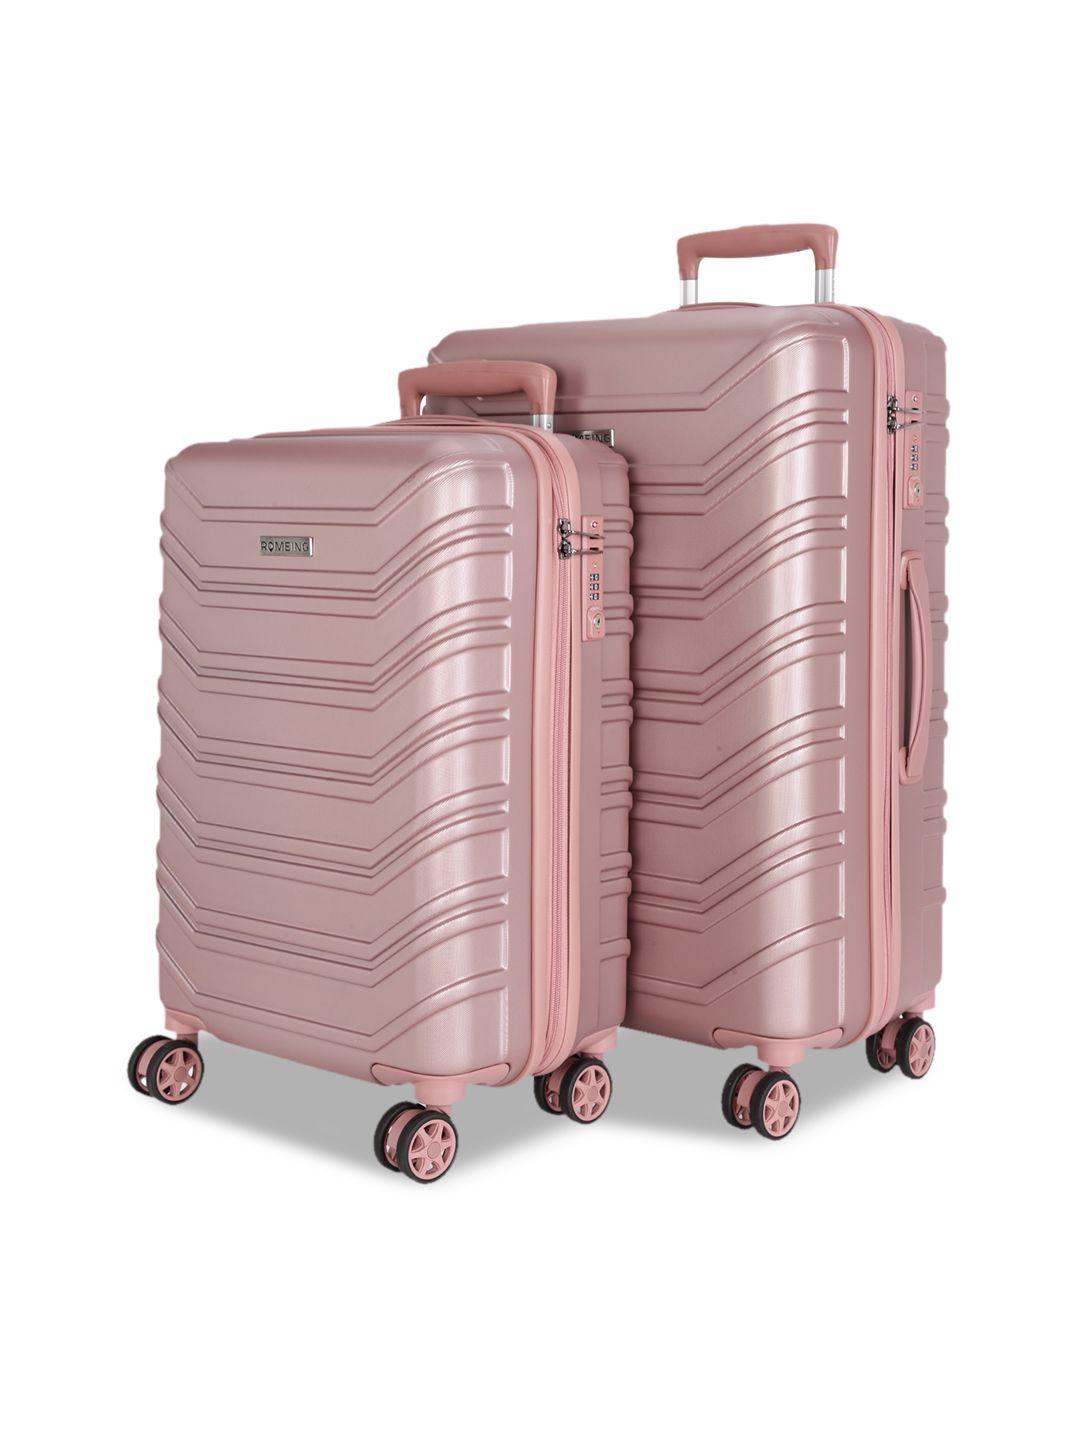 romeing monopoli set of 2 rose gold textured hard sided polycarbonate trolley suitcases